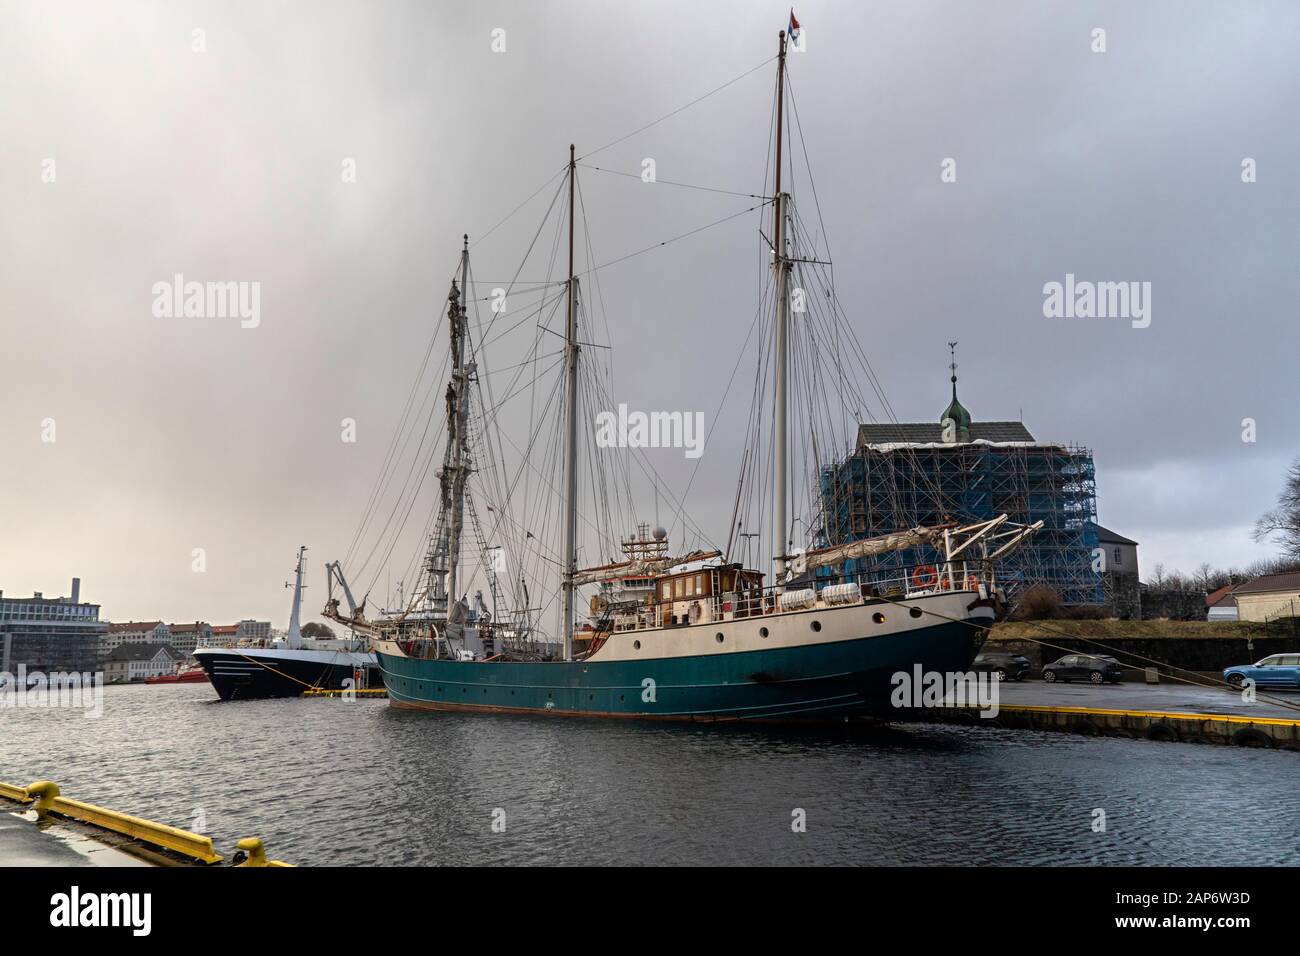 Sailing vessel, the tall ship barquentine Antigua in the port of Bergen, Norway.  Berthed adjacent Nykirkekaien near the ancient Rosenkrantz Tower. Stock Photo